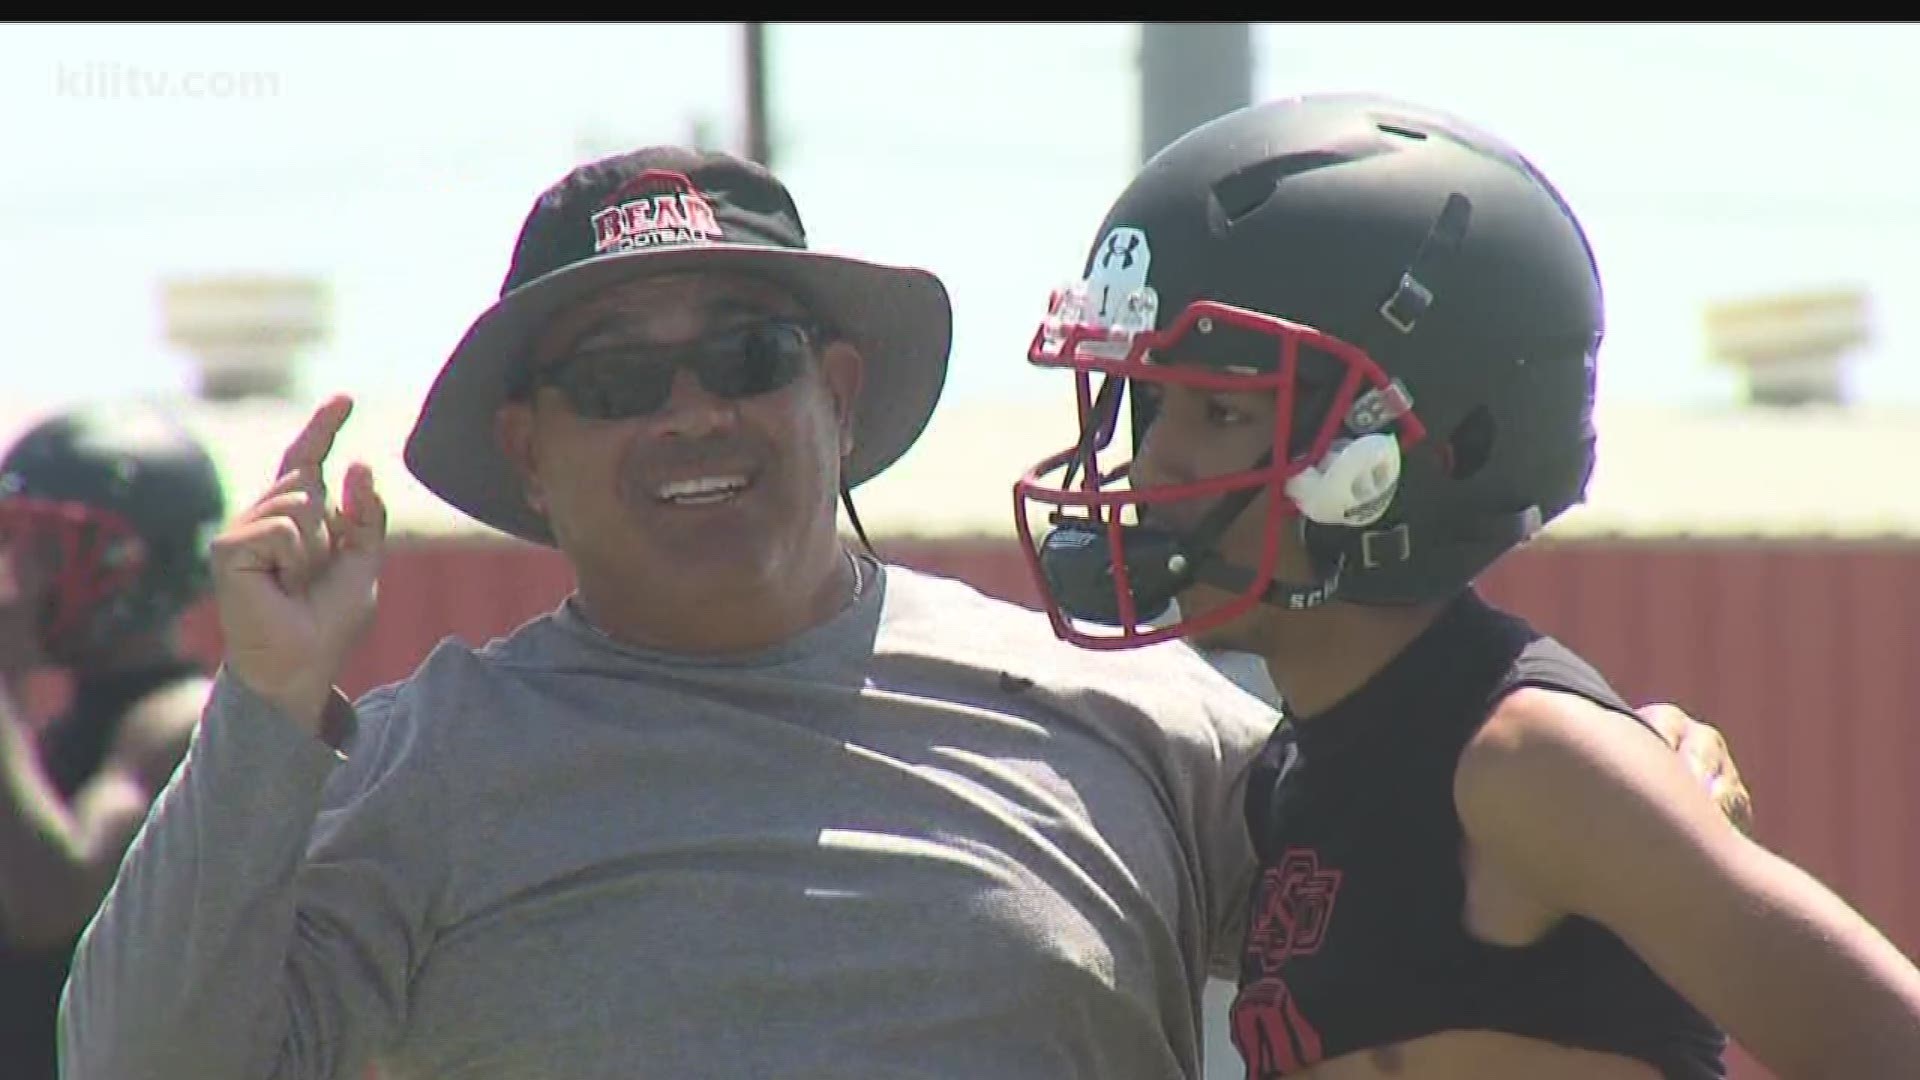 The Bears made their first playoff appearance in a decade last season in Pete Guajardo's first year at the helm.